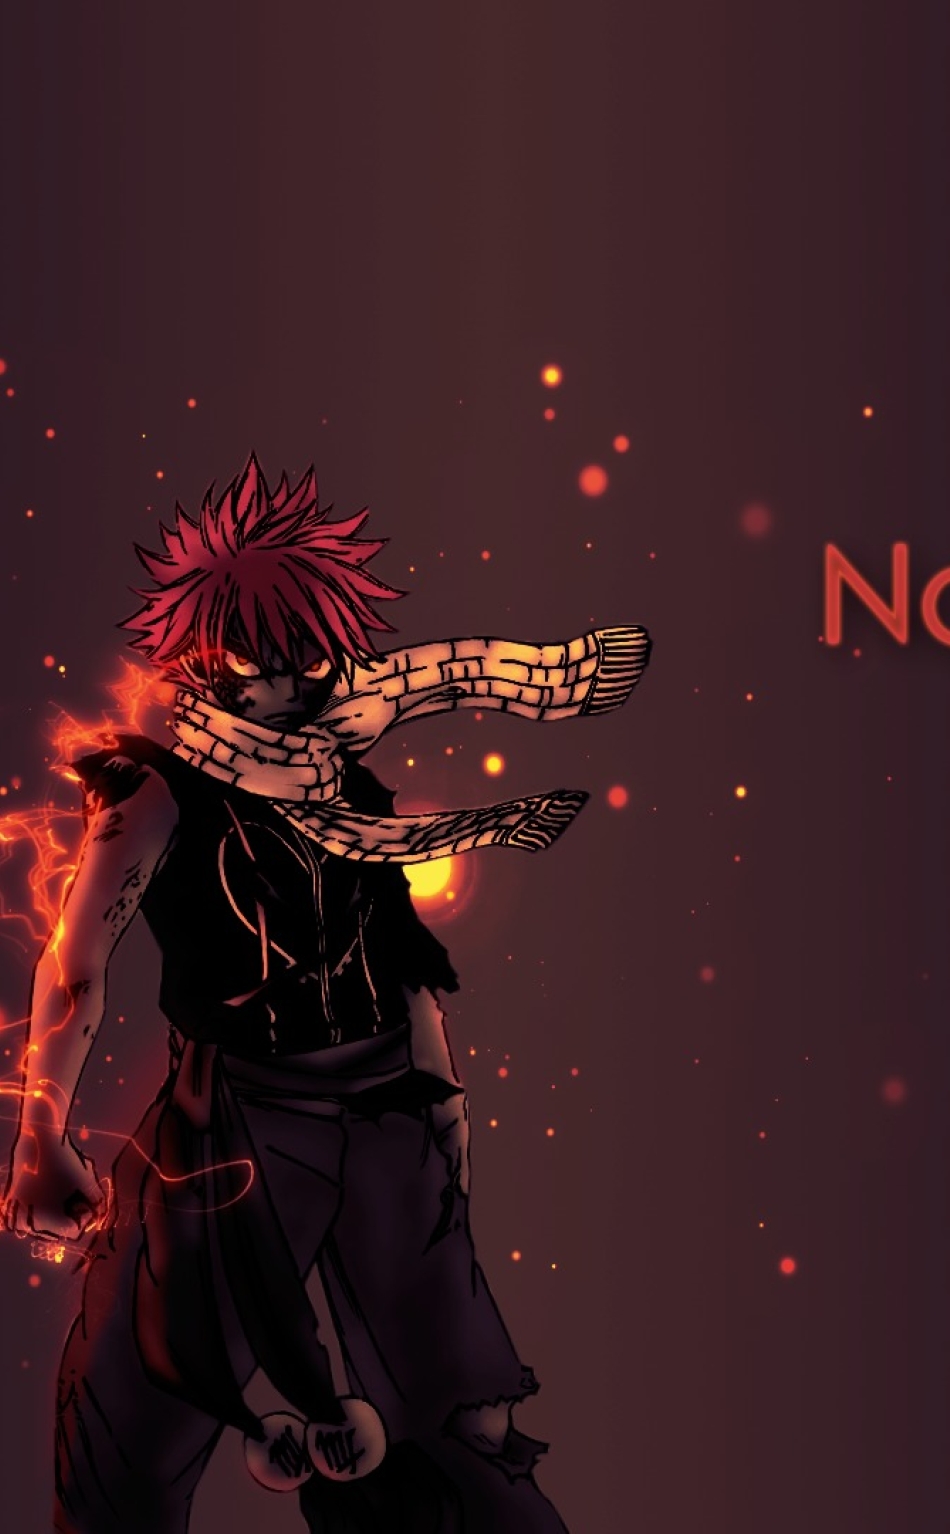 Natsu Dragneel 5 Photo Natsudragneel5b  Fairy Tail Wallpaper Phone  Transparent PNG  914x903  Free Download on NicePNG